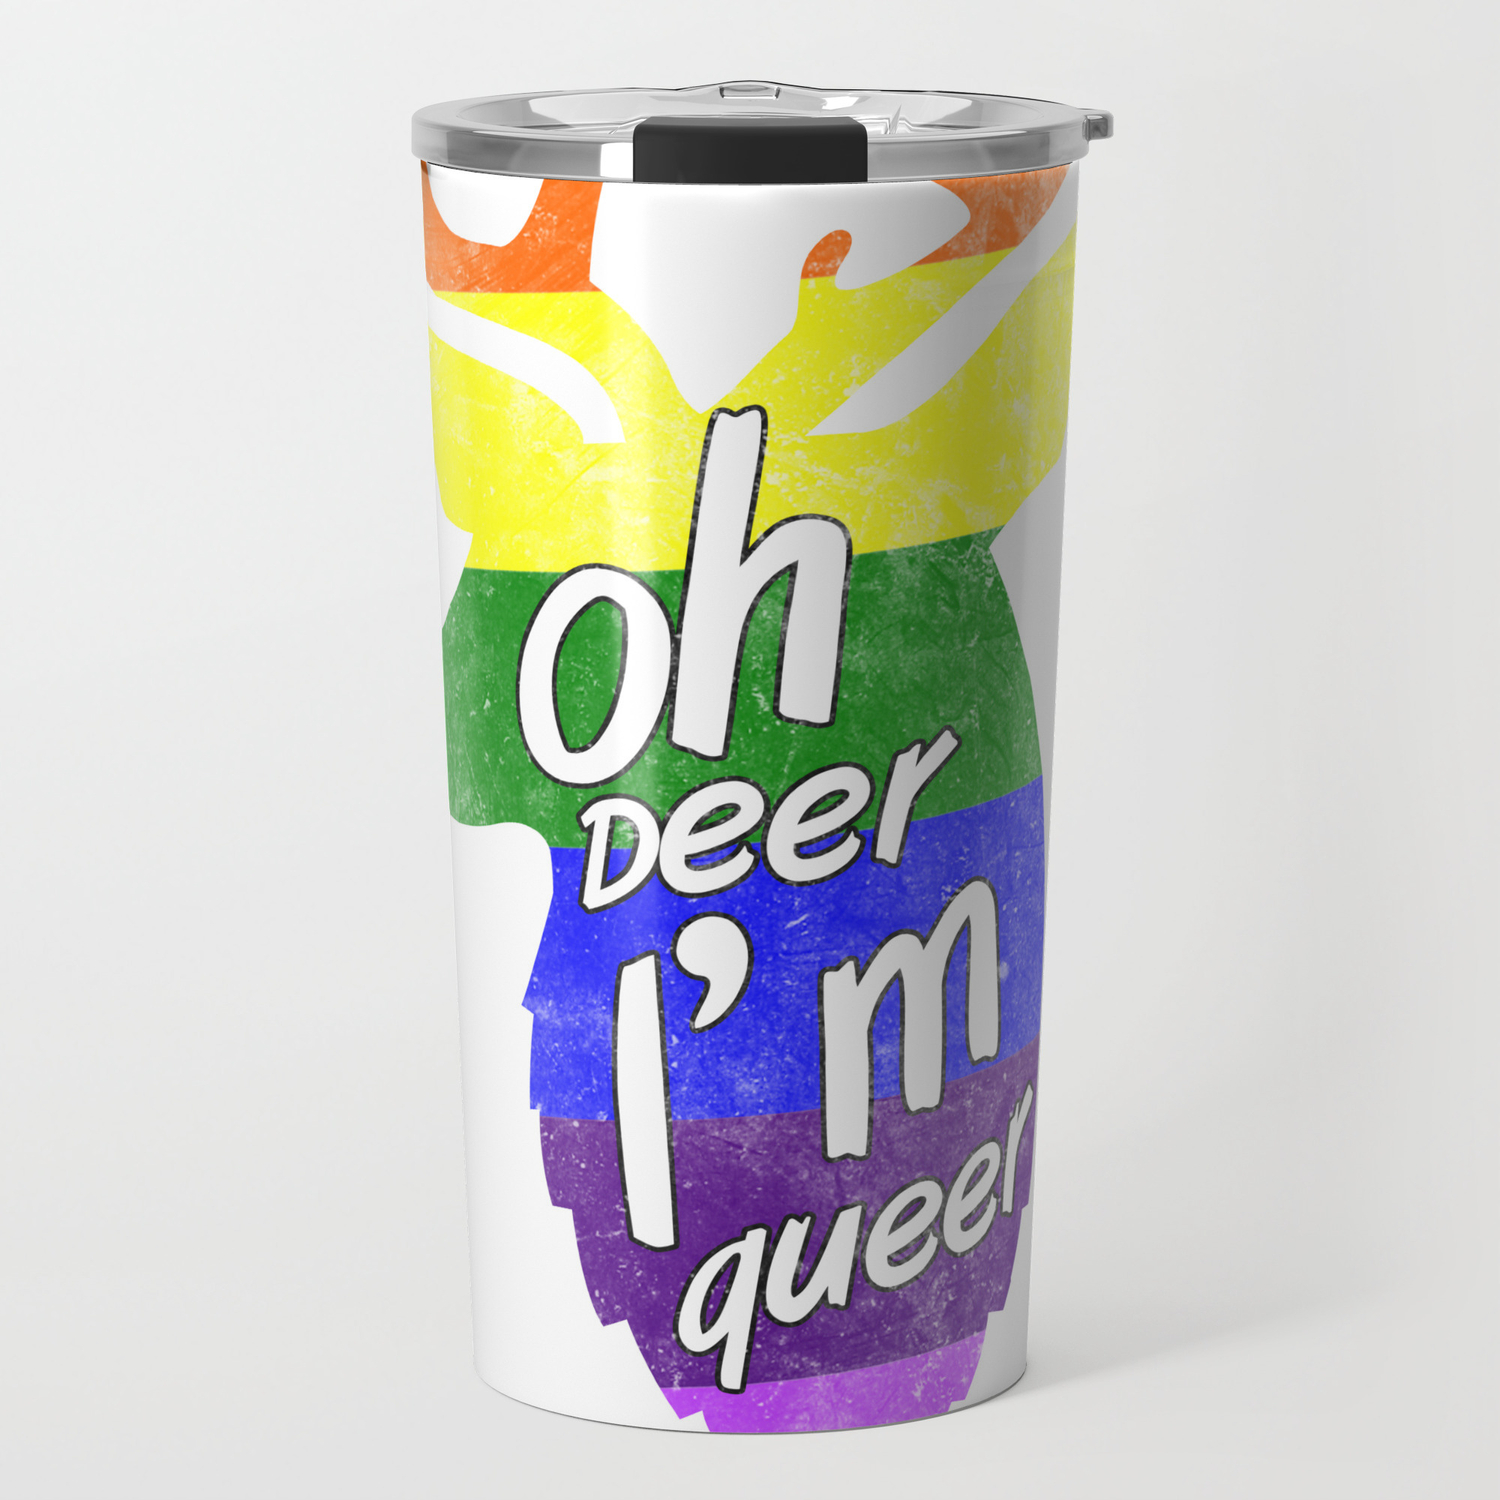 Oh Deer I'm Queer Rainbow Pride Gay Premium Gift Wrap Wrapping Paper Roll